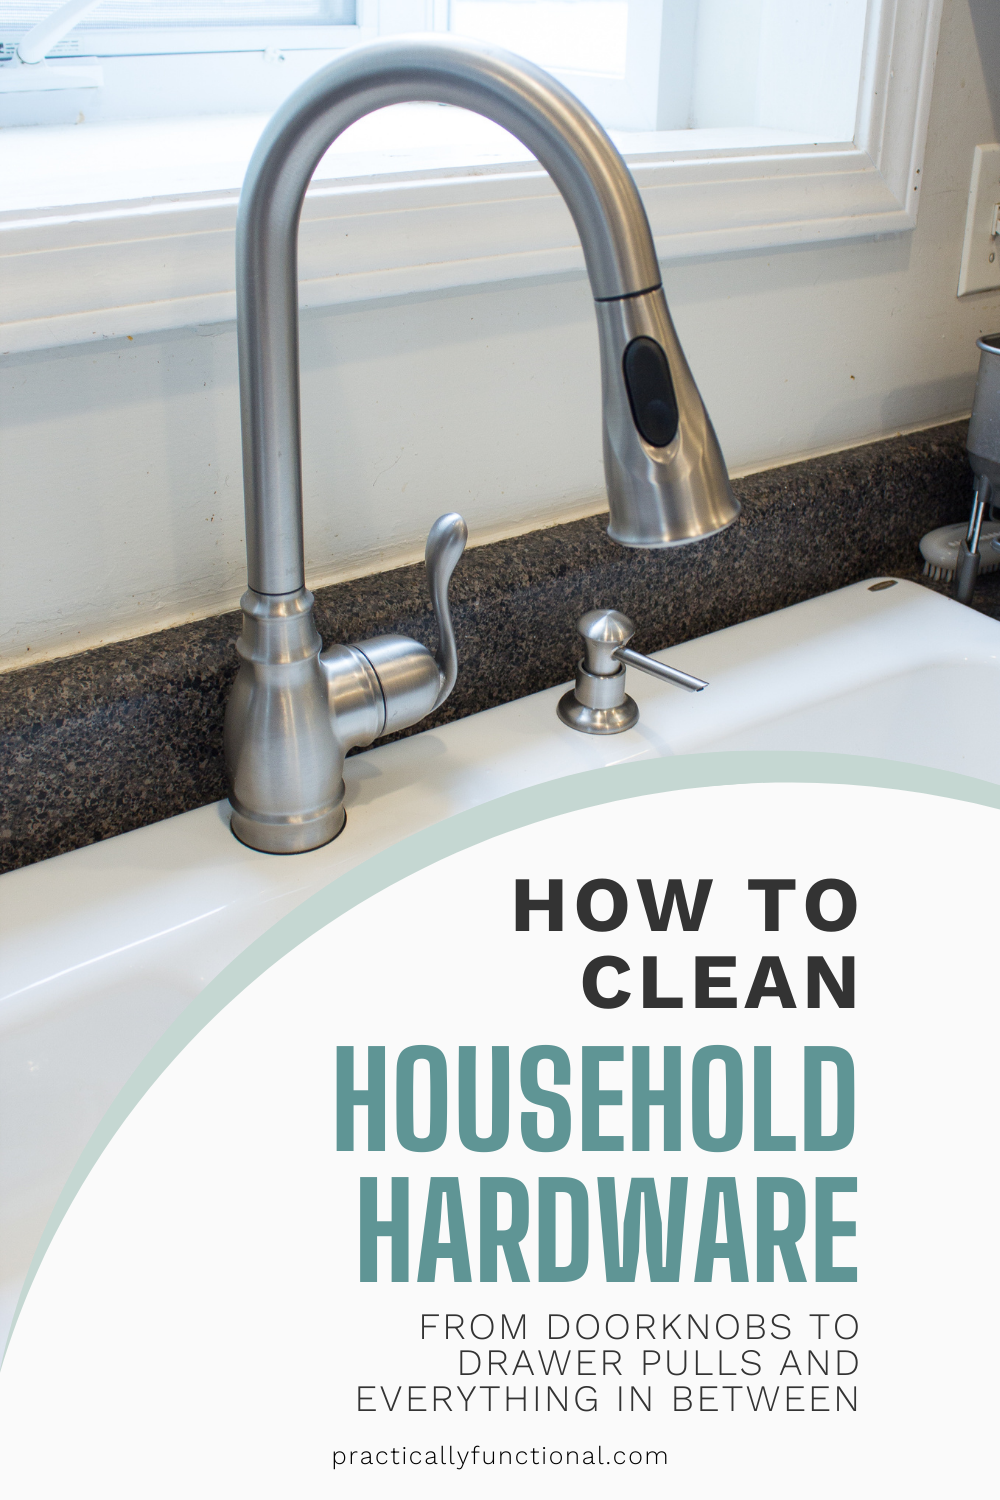 brushed nickel kitchen faucet with pulldown sprayer over large white sink plus text "How To Clean Household Hardware"